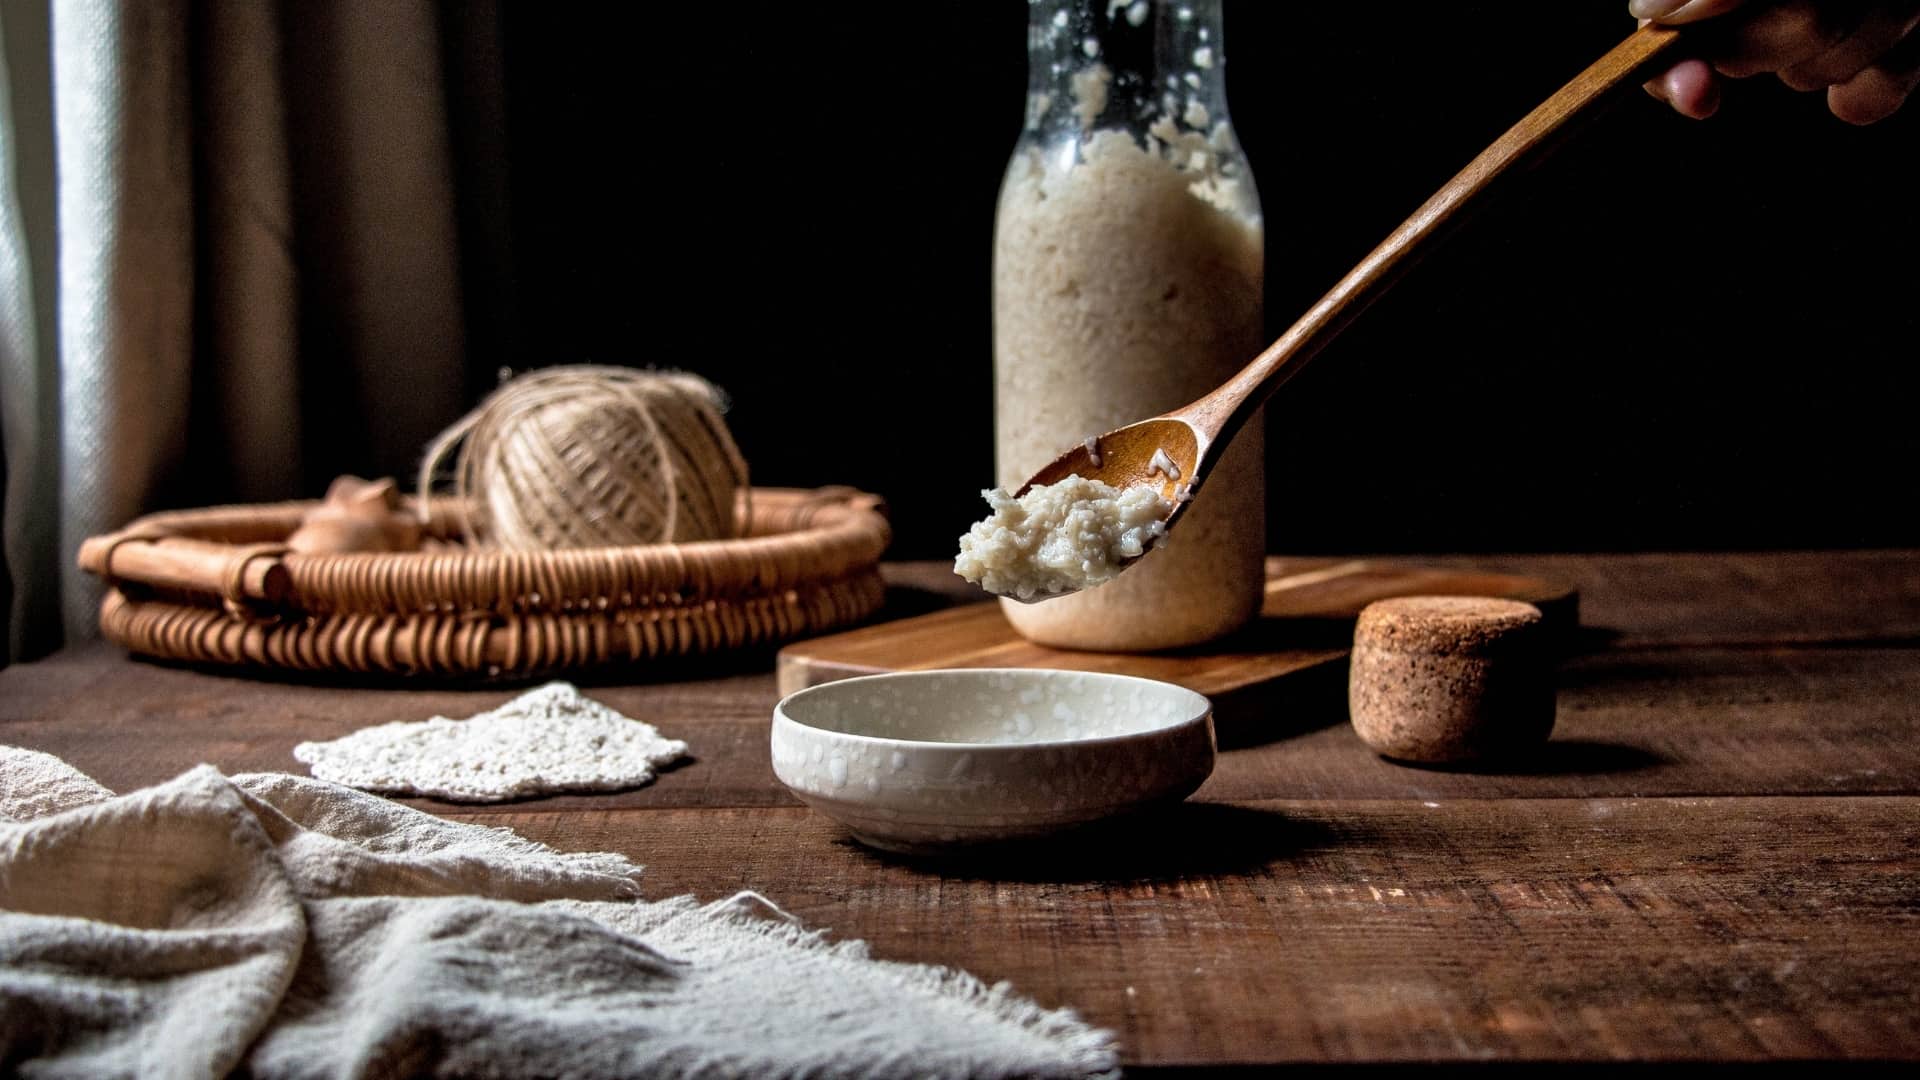 Fermented rice on a wooden spoon